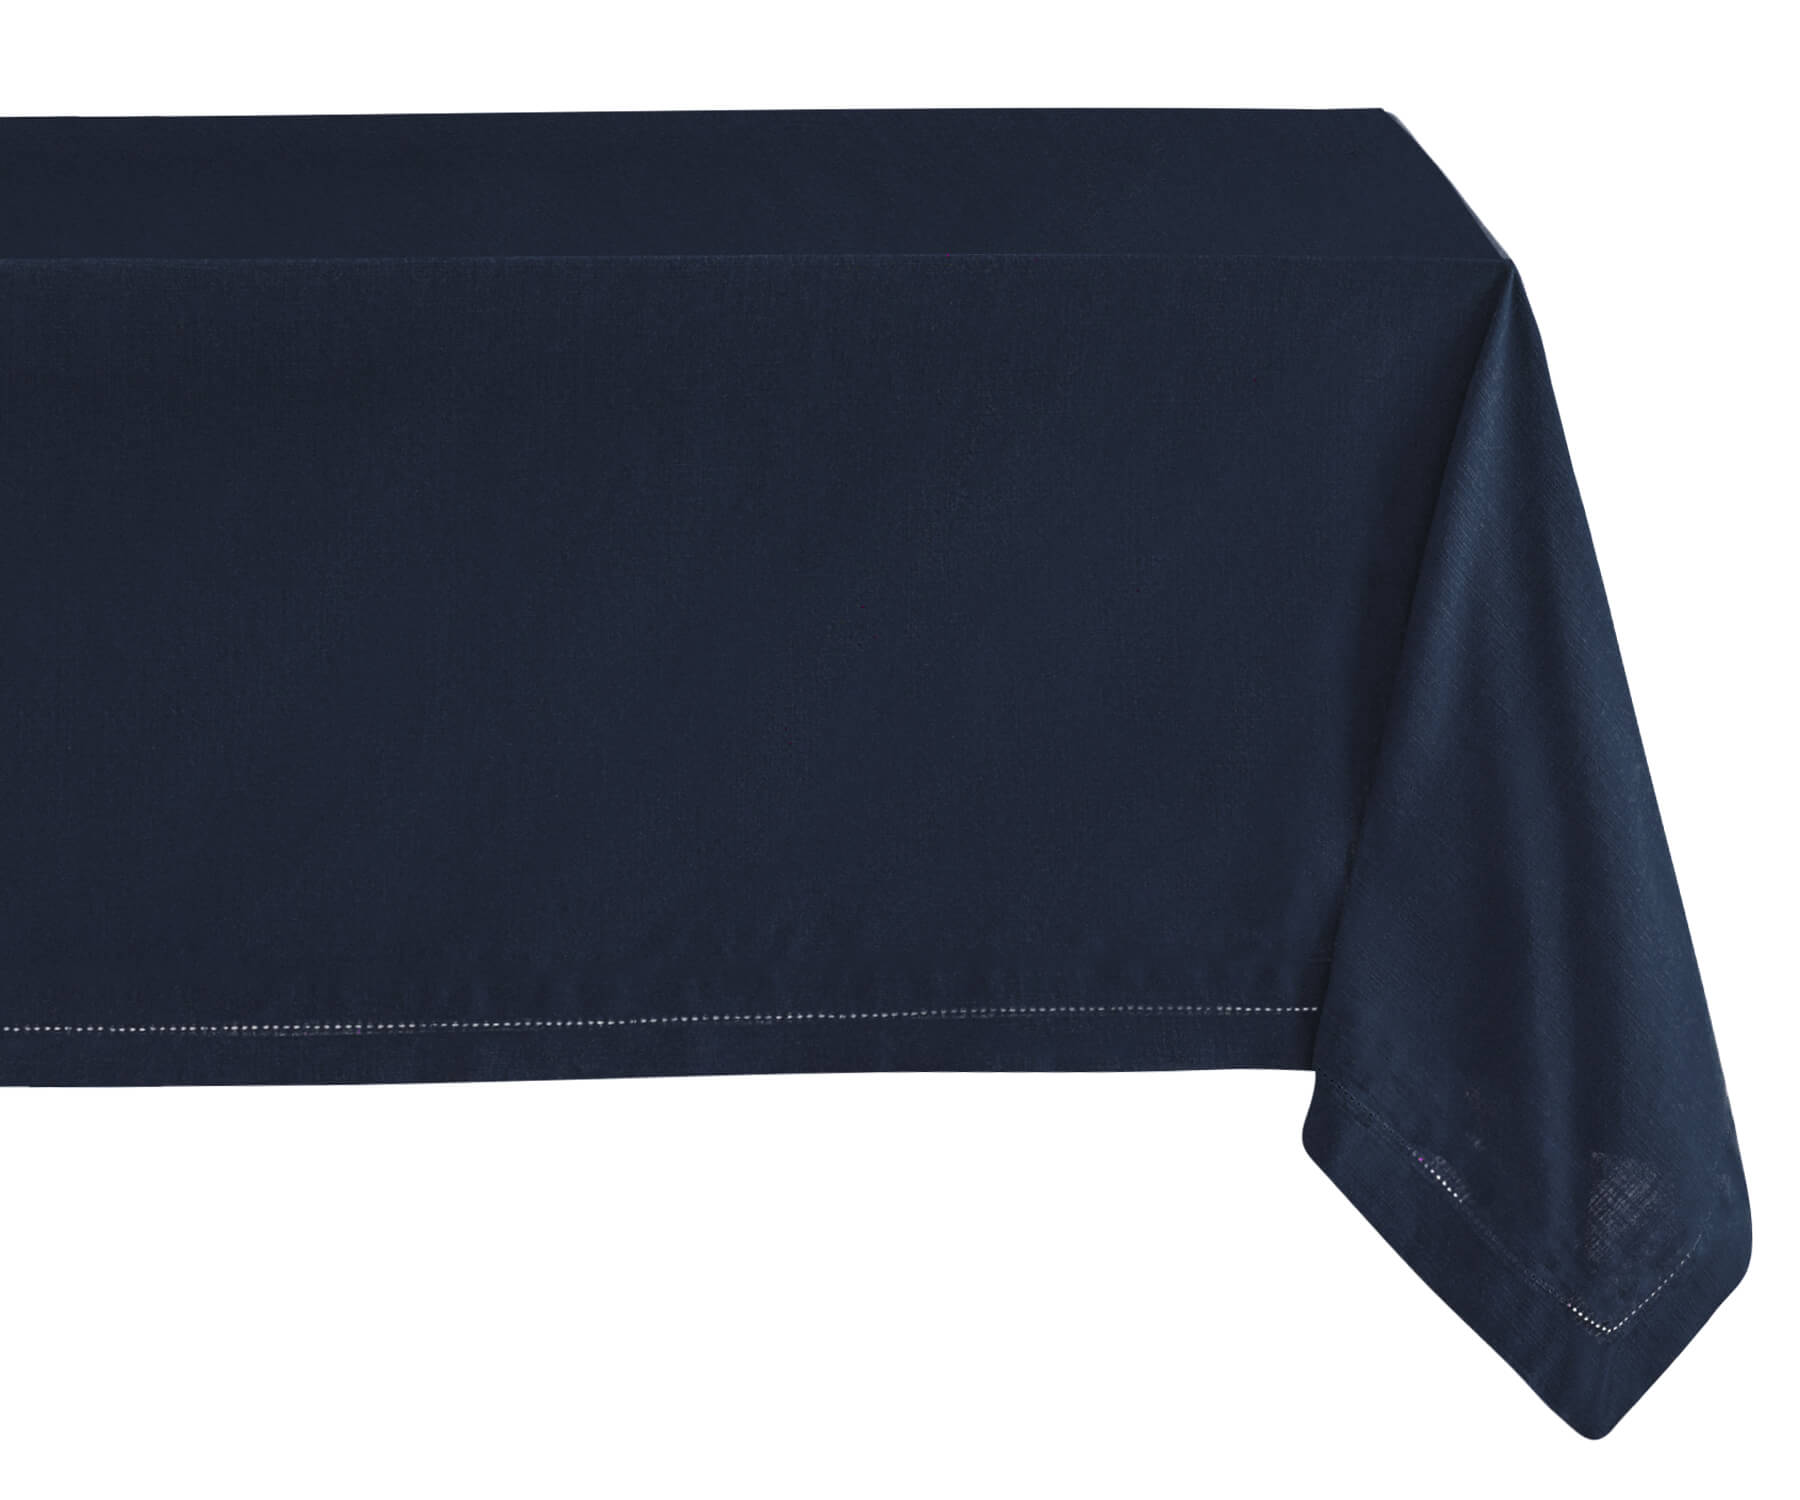 navy blue tablecloth - Rectangular tablecloth which are hemstitched placed in white background.